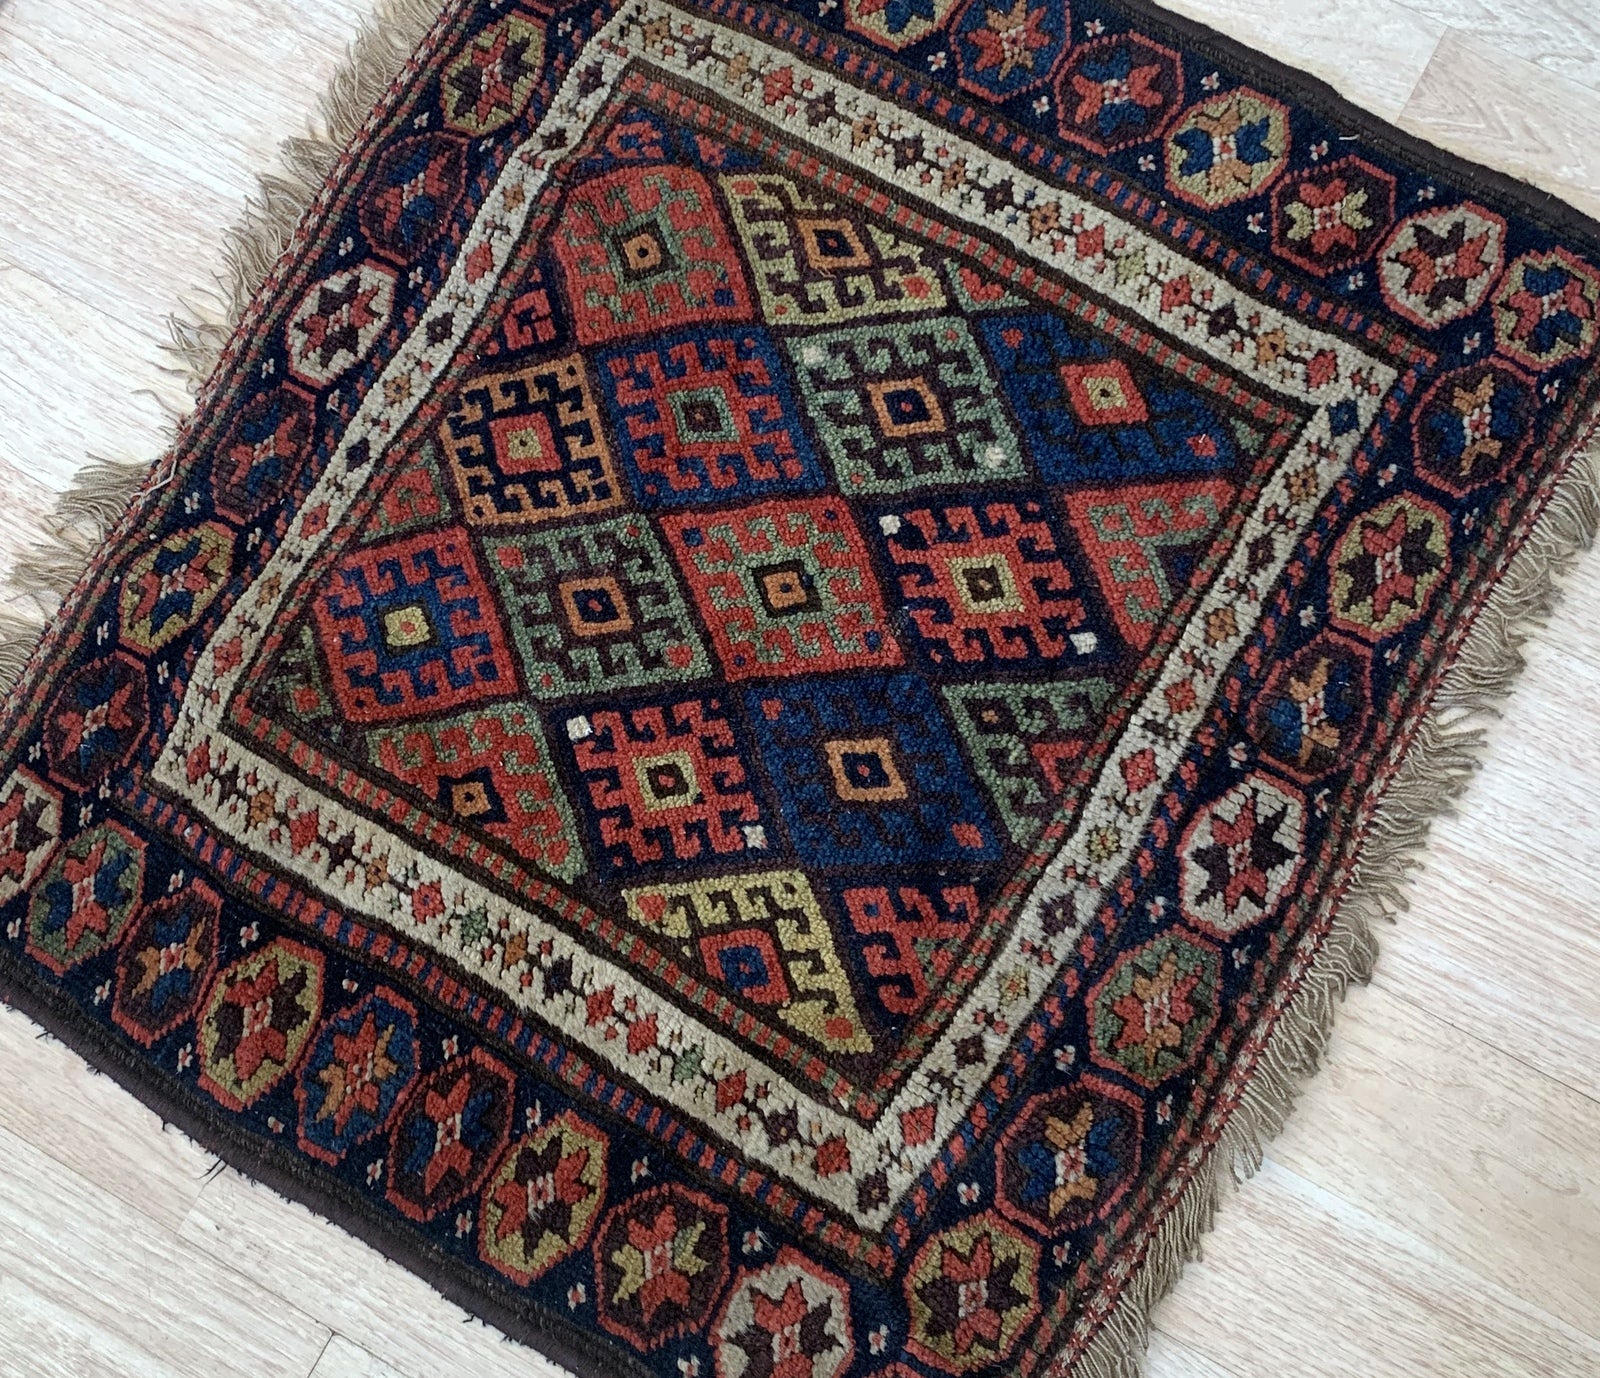 Handmade antique Persian Kurdish jaf bag face in original good condition. The rug has been made in the end of 19th century in Persia. All dyes on the bag face are natural. This rug is collectible piece.